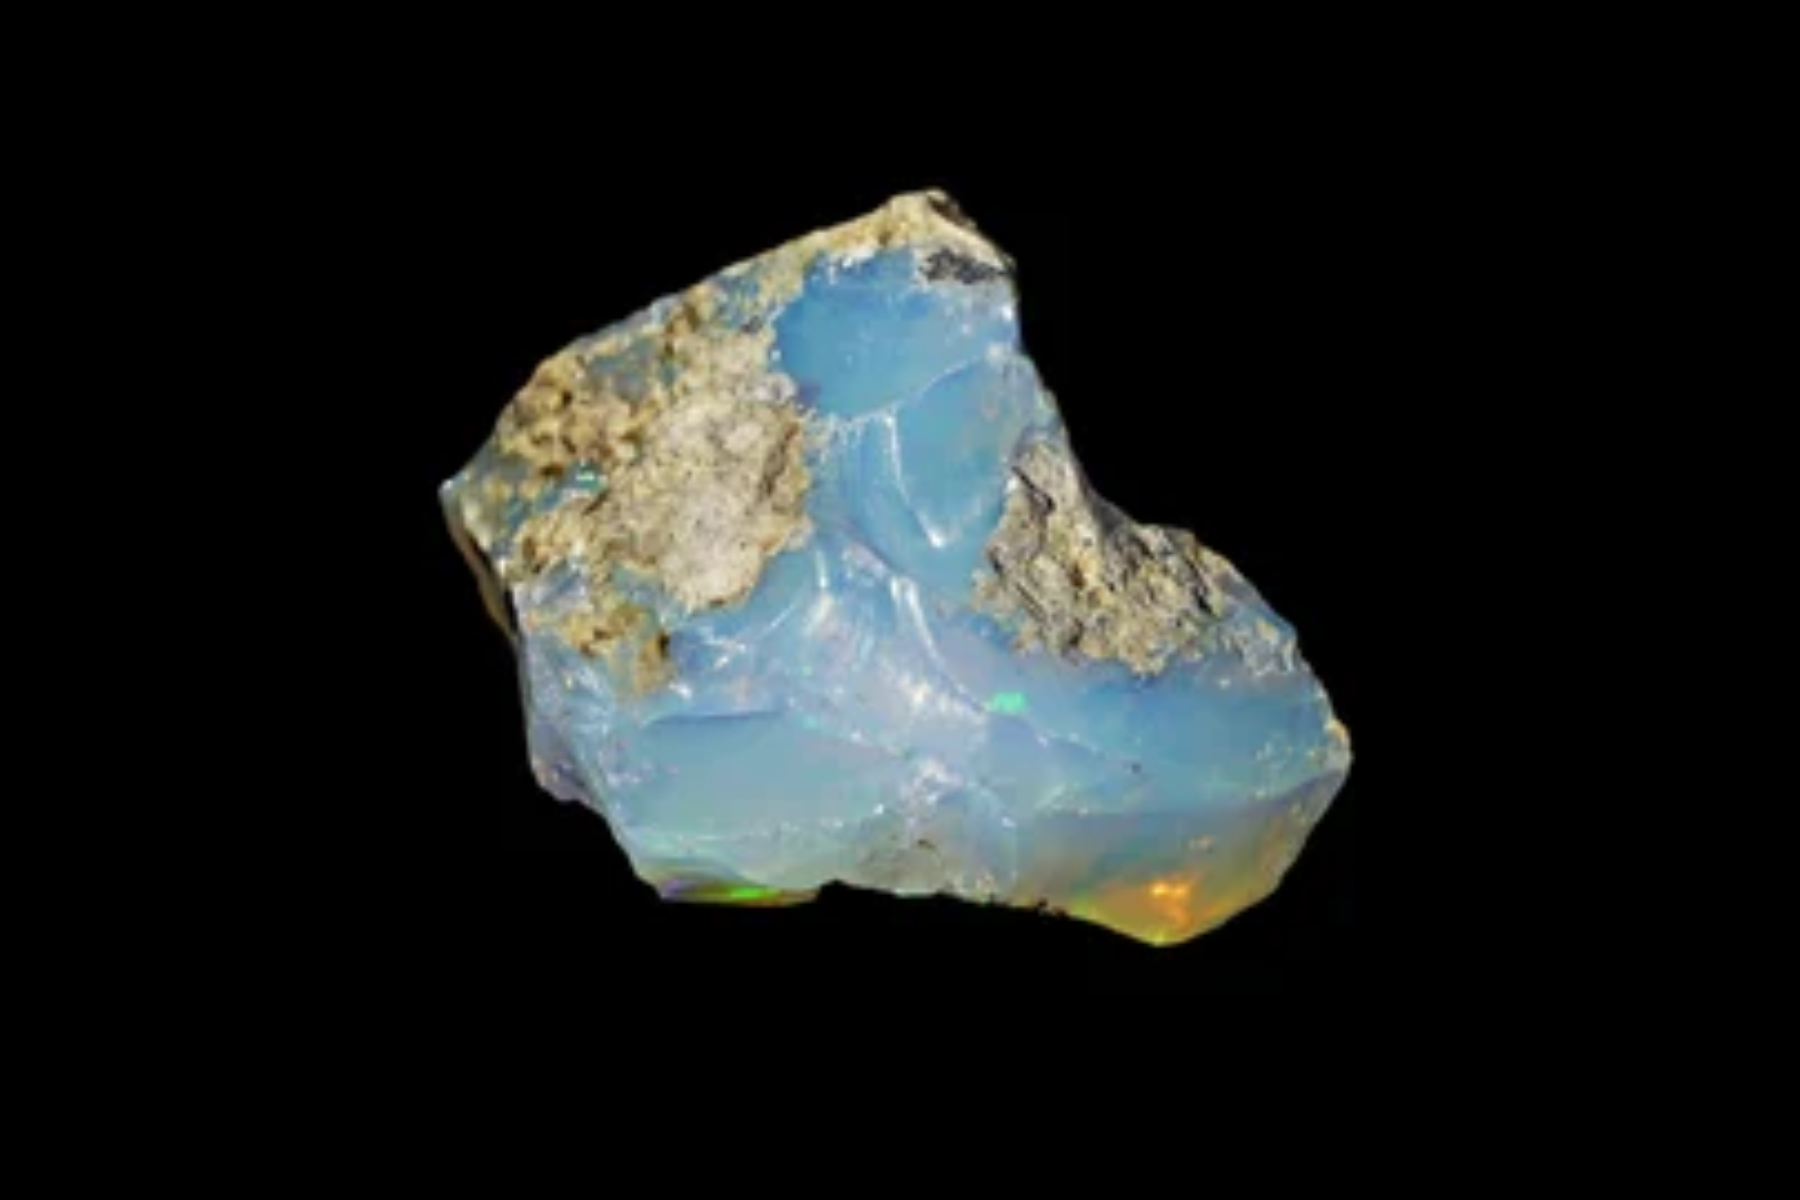 Natural and organic raw opal on a dark background